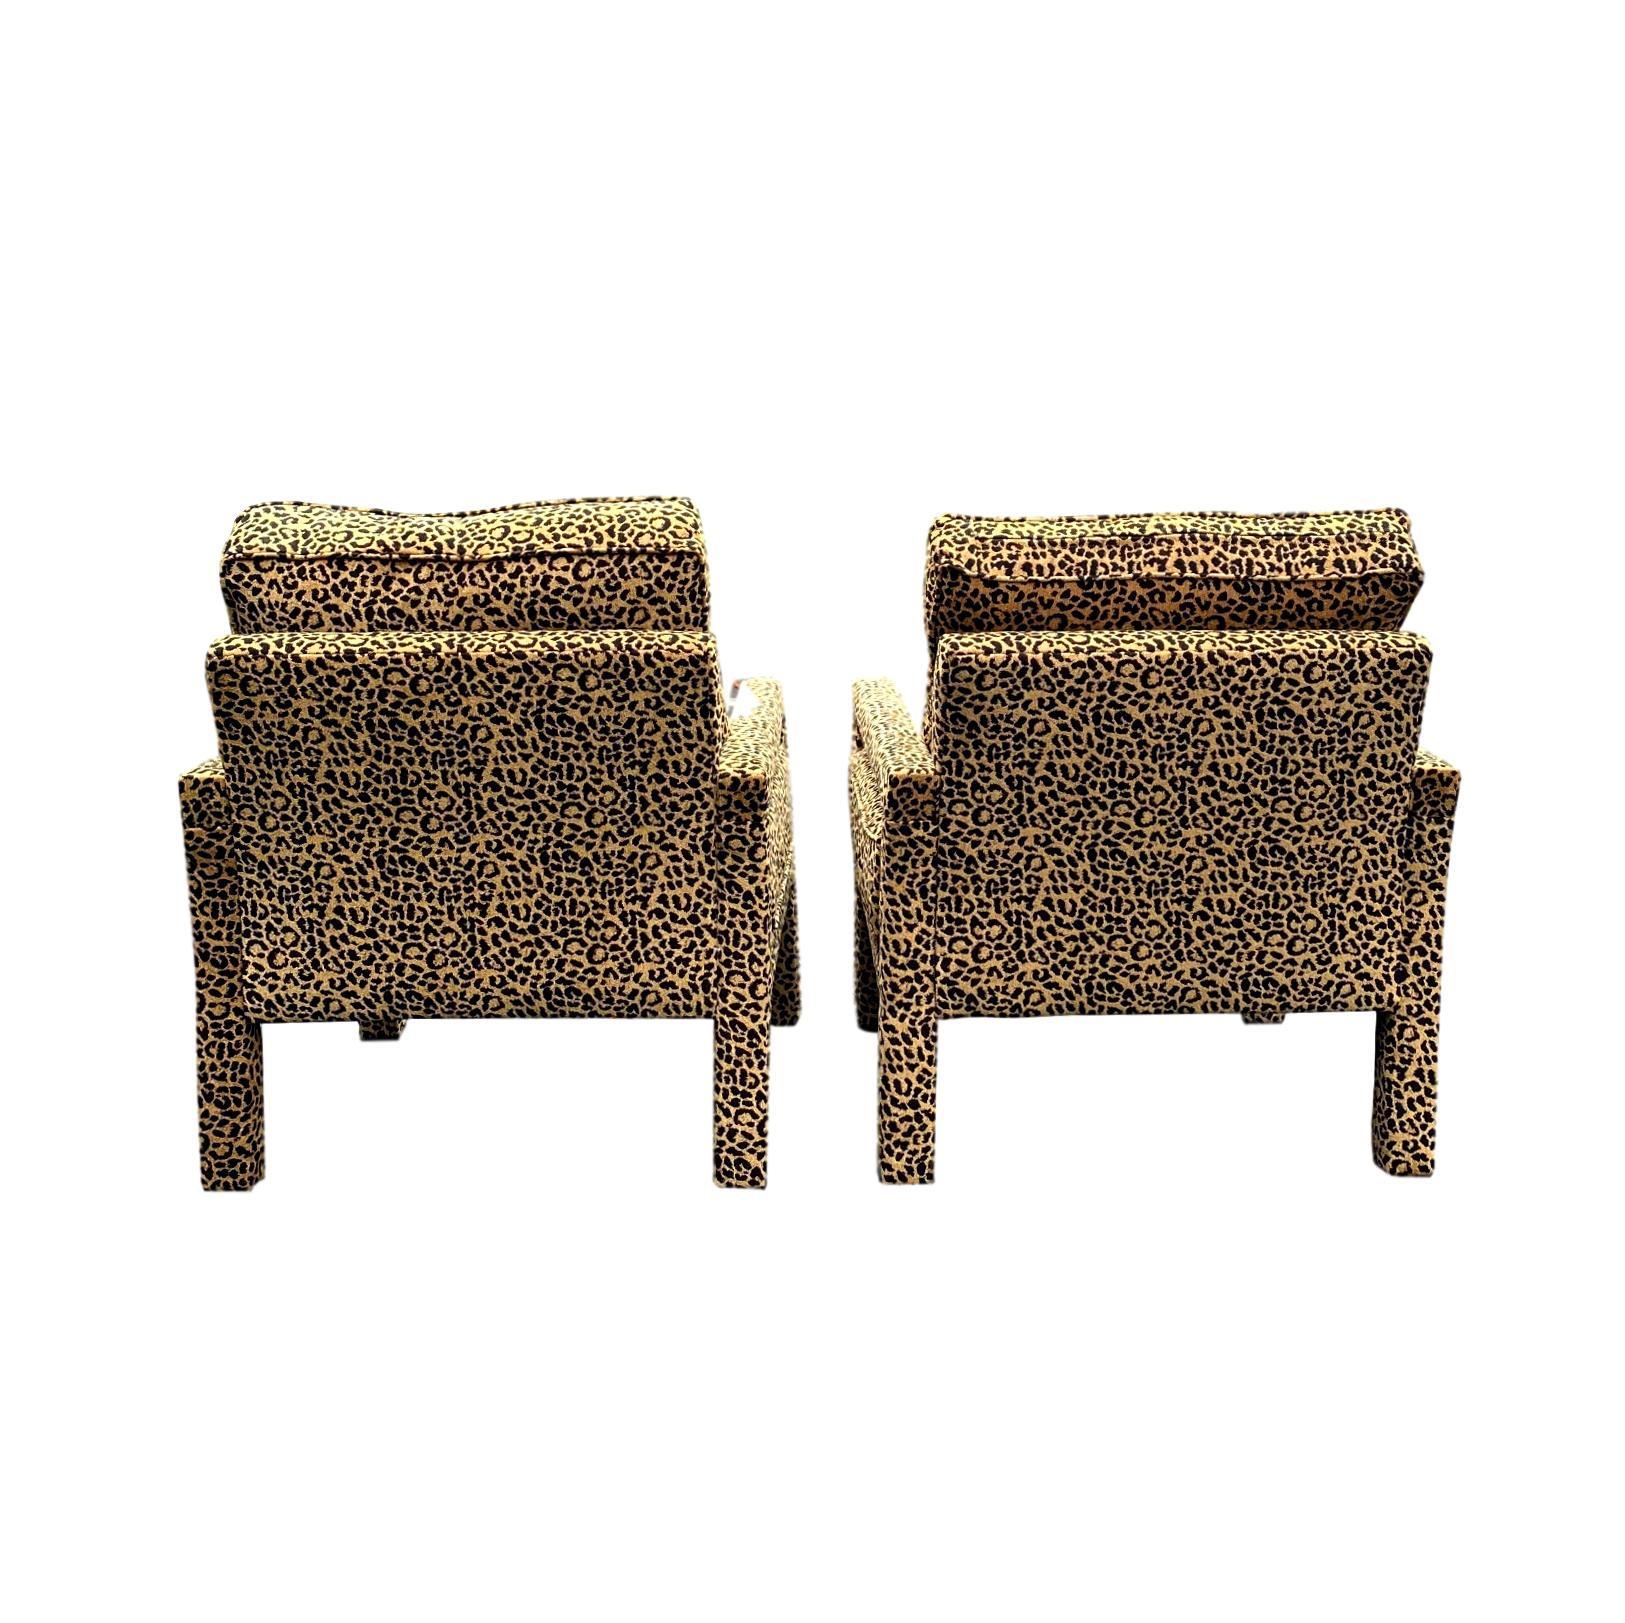 Mid-Century Modern Pair of New Milo Baughman Style Iconic Parsons Chairs in Leopard Chenille